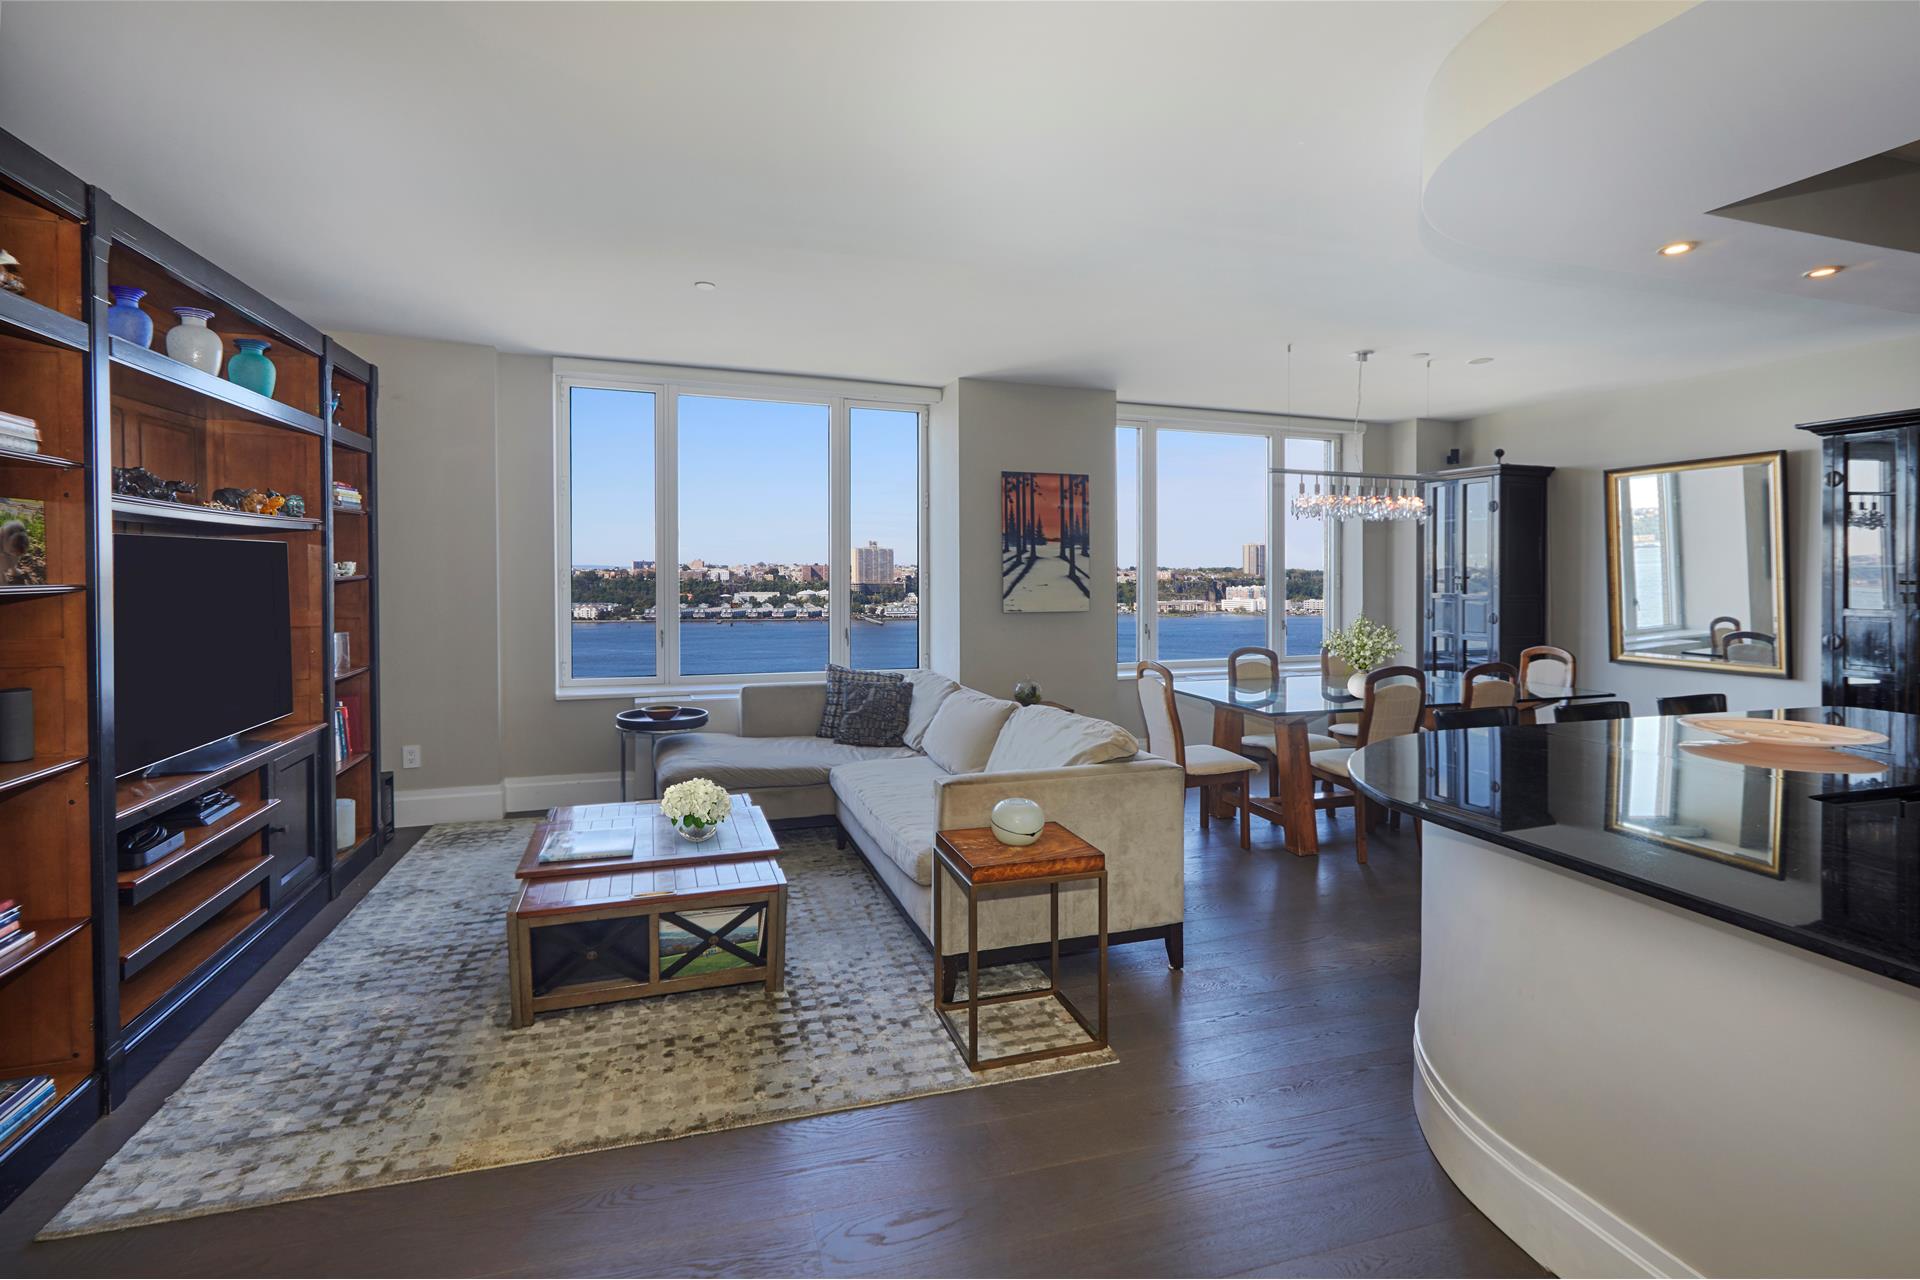 220 Riverside Boulevard 20L, Lincoln Sq, Upper West Side, NYC - 2 Bedrooms  
2 Bathrooms  
4 Rooms - 